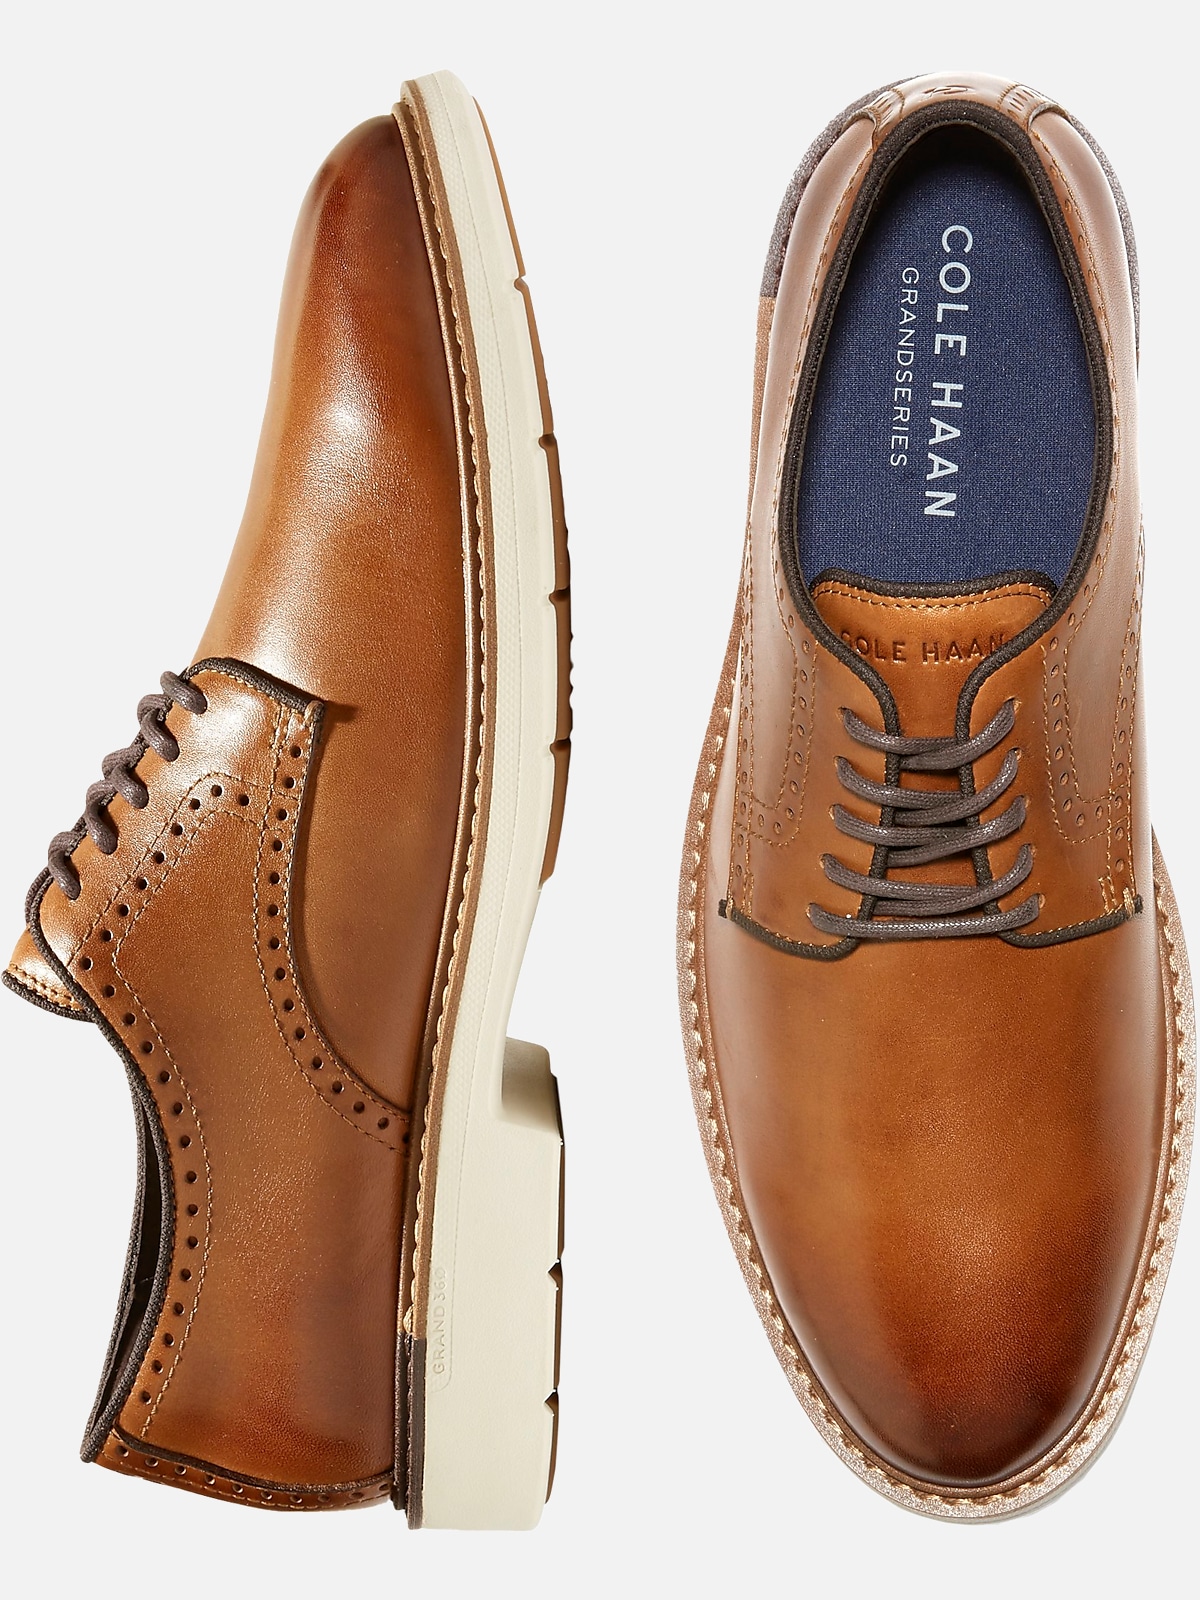 https://image.menswearhouse.com/is/image/TMW/TMW_429V_05_COLE_HAAN_CASUAL_SHOES_BRITISH_TAN_MAIN?imPolicy=pdp-zoom-mob